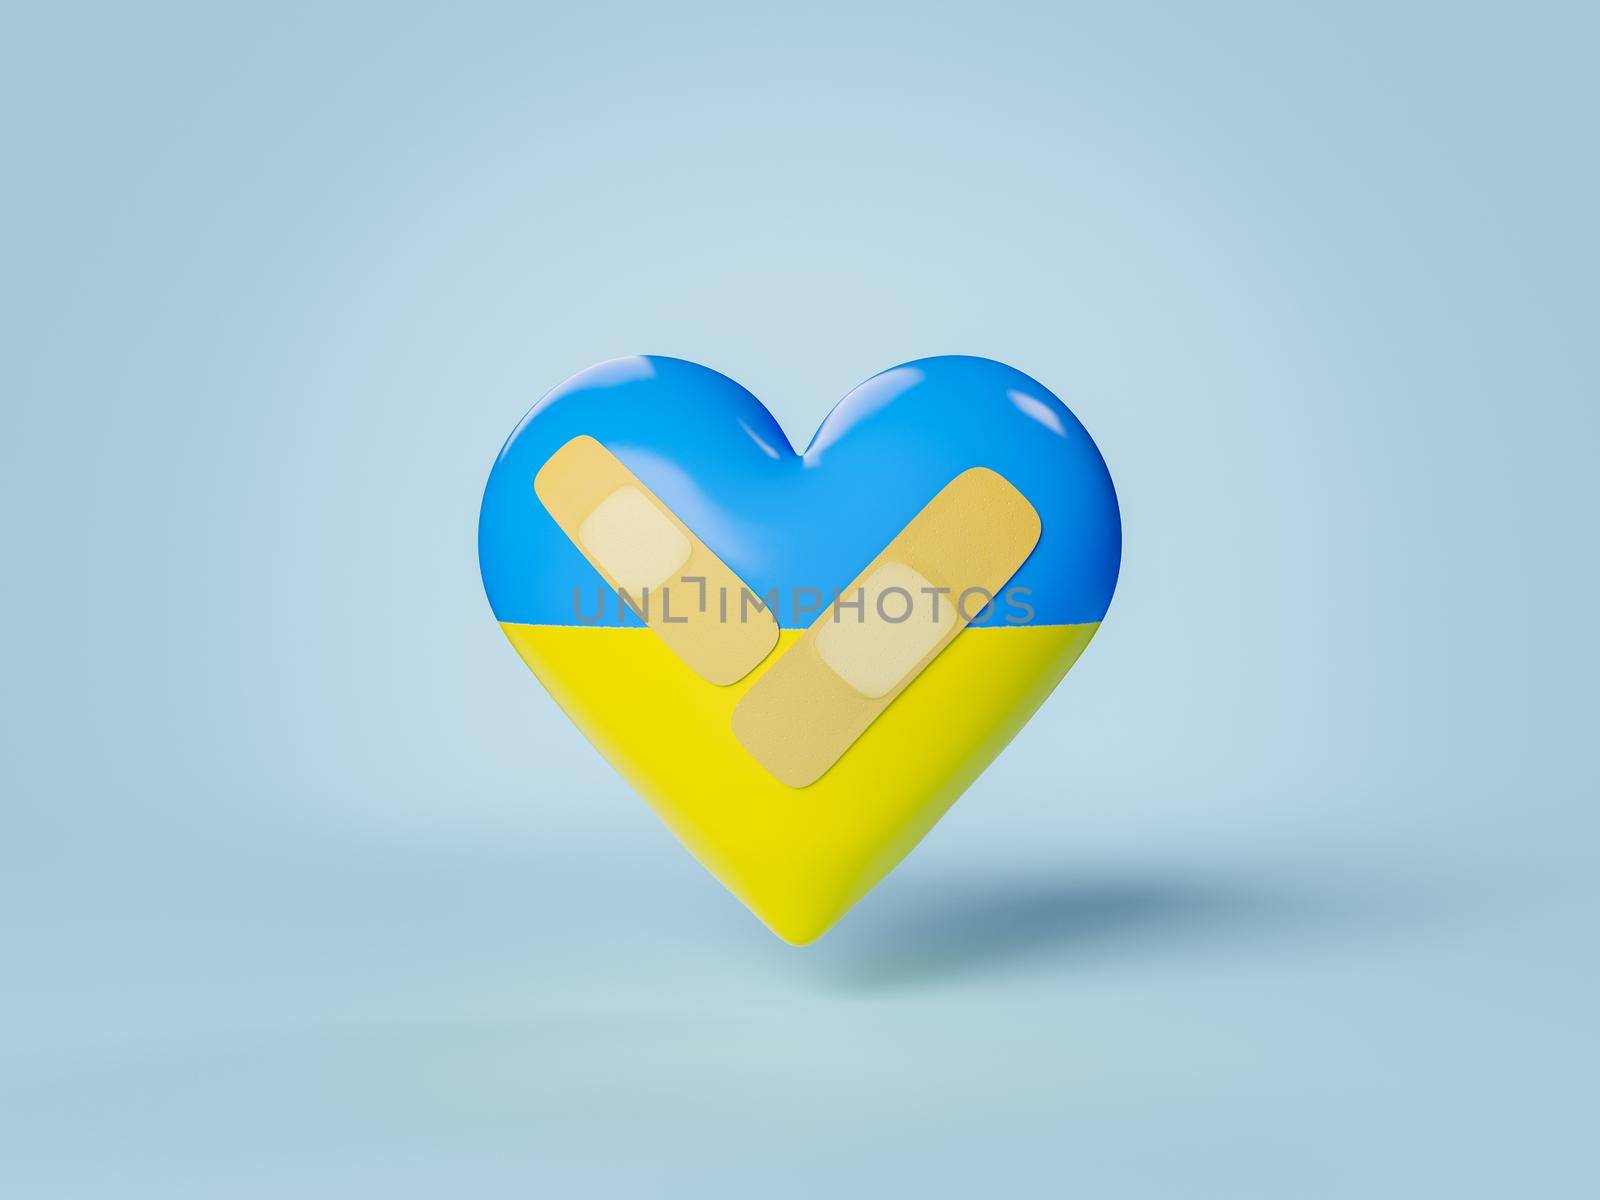 ukraine flag on heart with bandage for wounds. concept of recovery, war, solidarity, healing, shelter and peace. 3d rendering